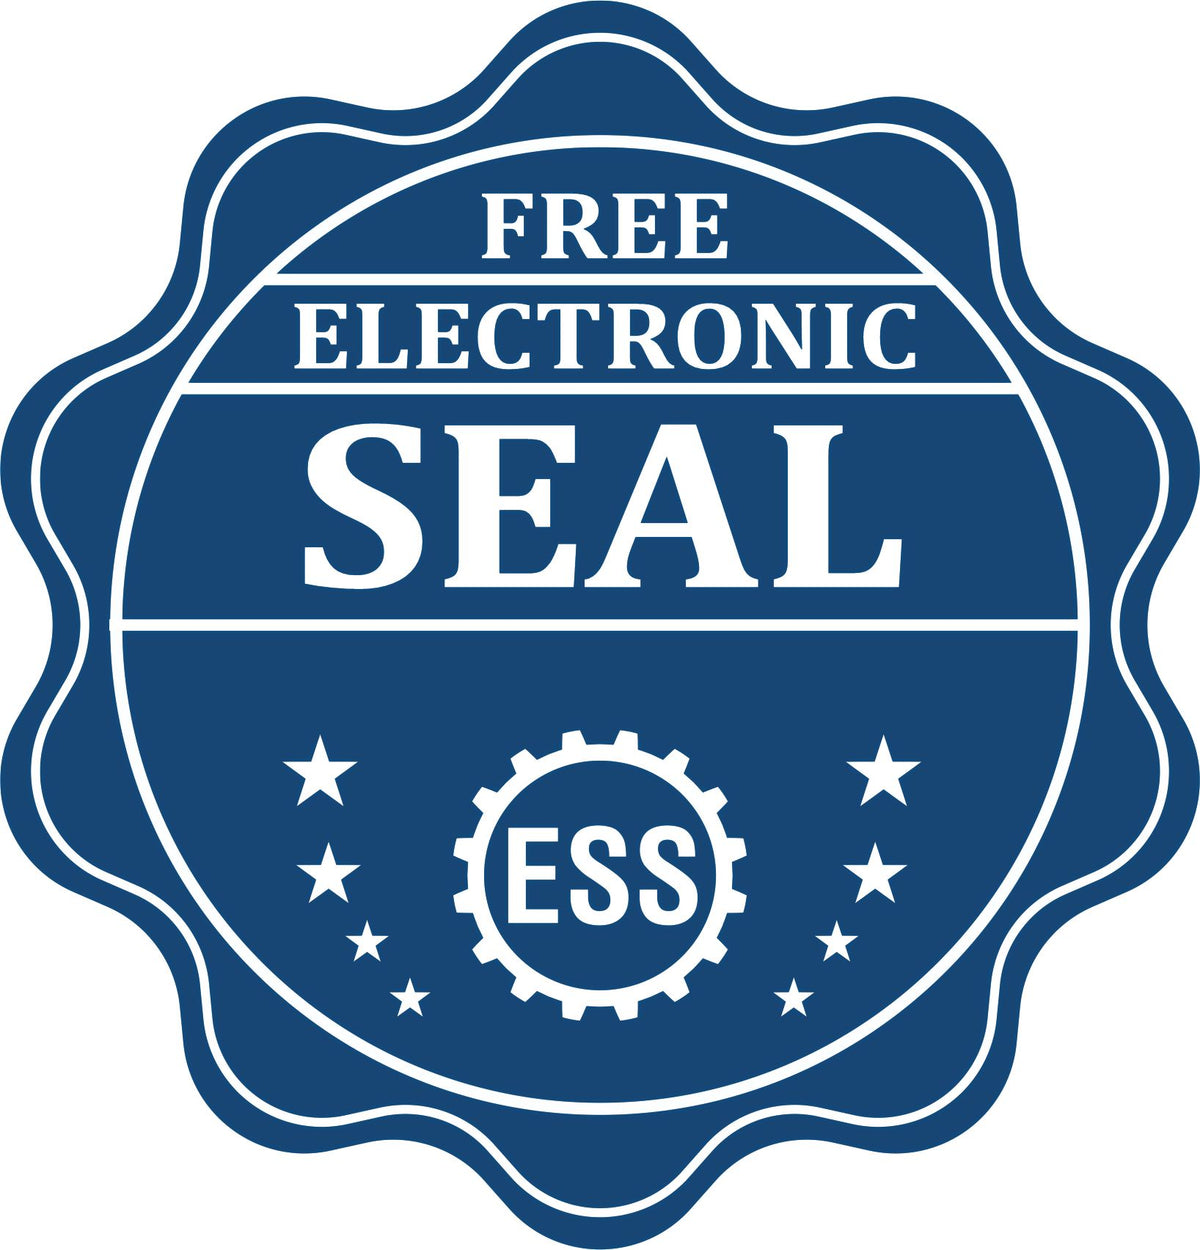 A badge showing a free electronic seal for the Soft Pocket North Carolina Landscape Architect Embosser with stars and the ESS gear on the emblem.